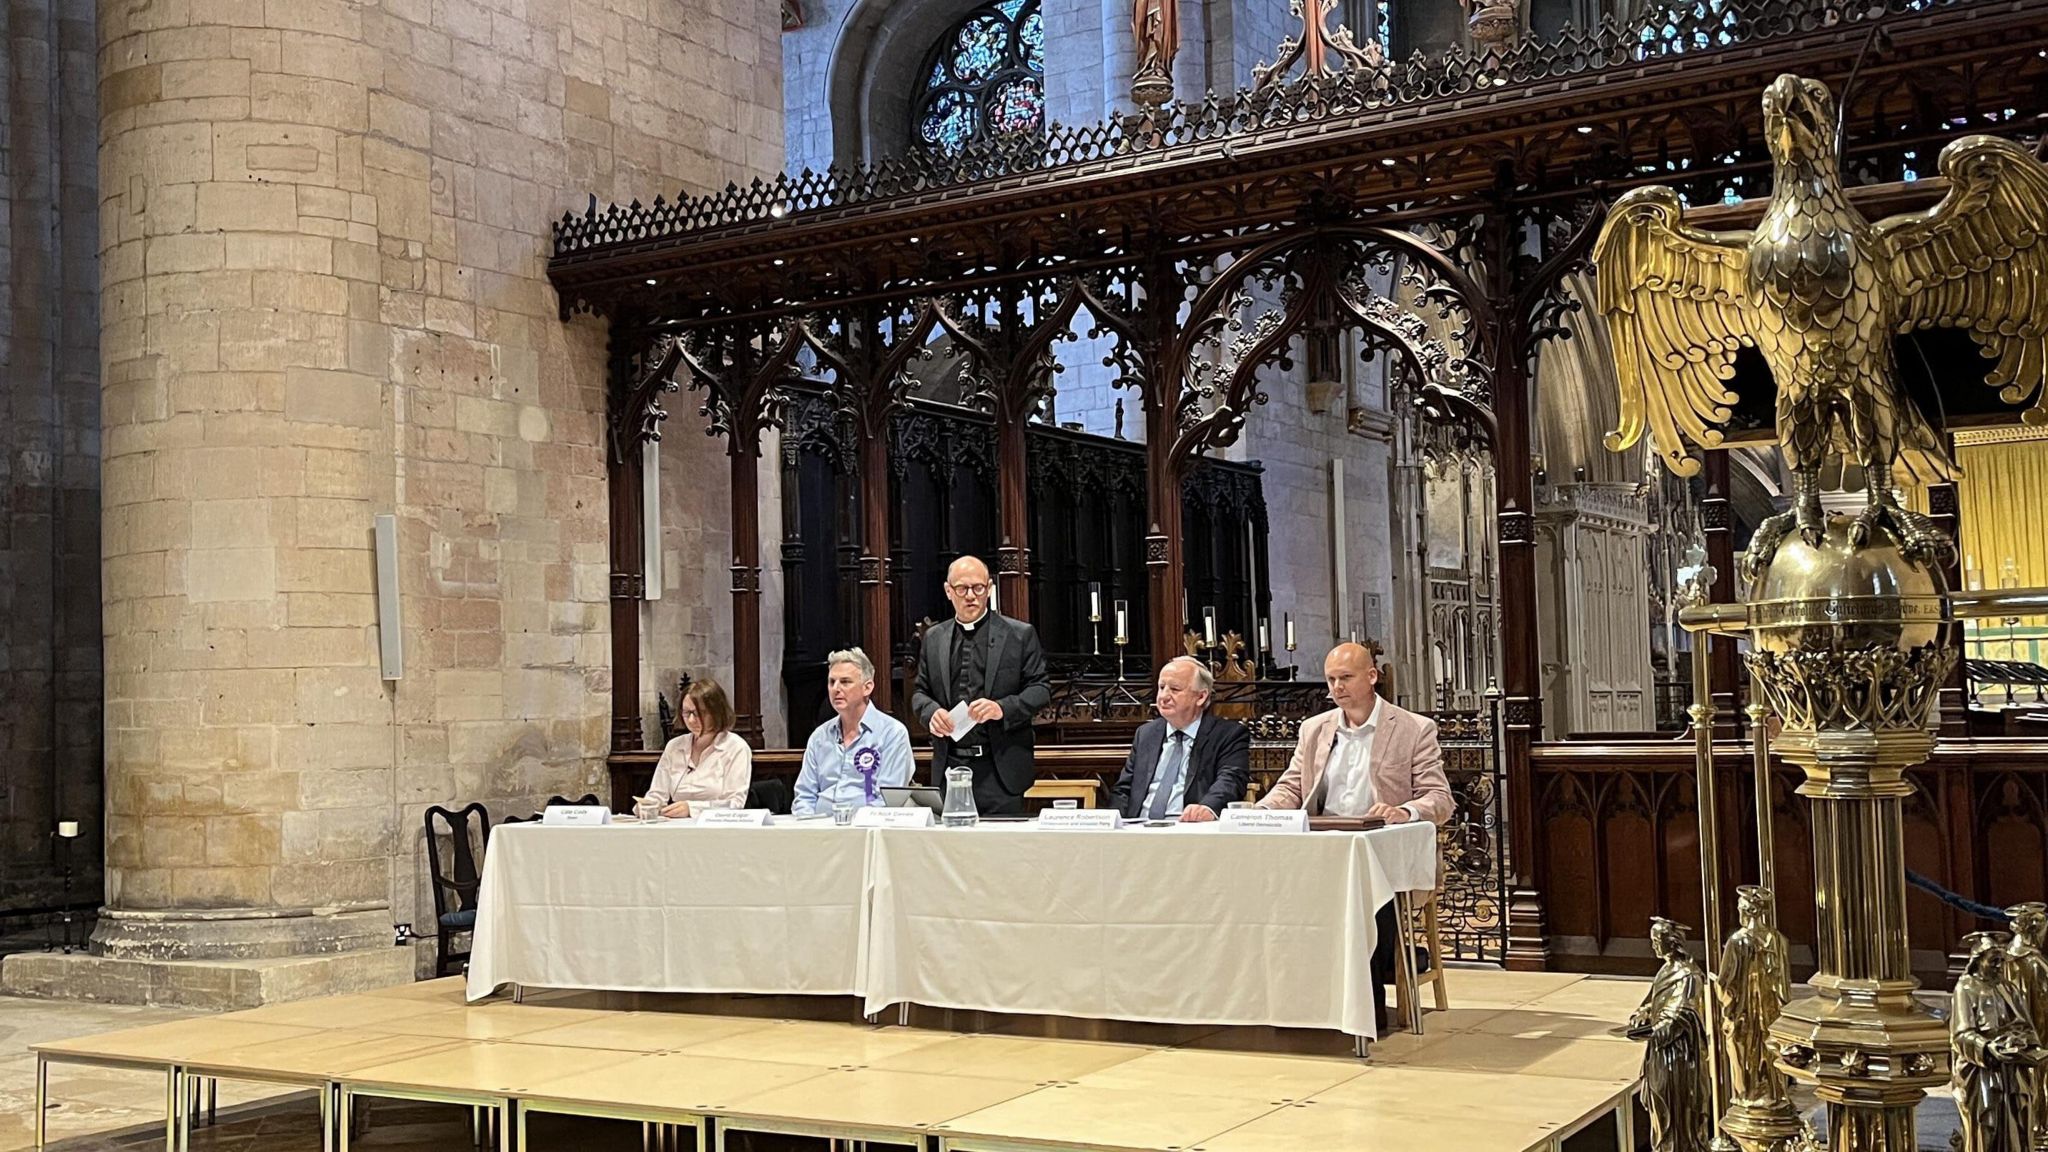 Four people sitting either side of a standing vicar on a stage in Tewskesbury Abbey next to a large golden eagle lectern